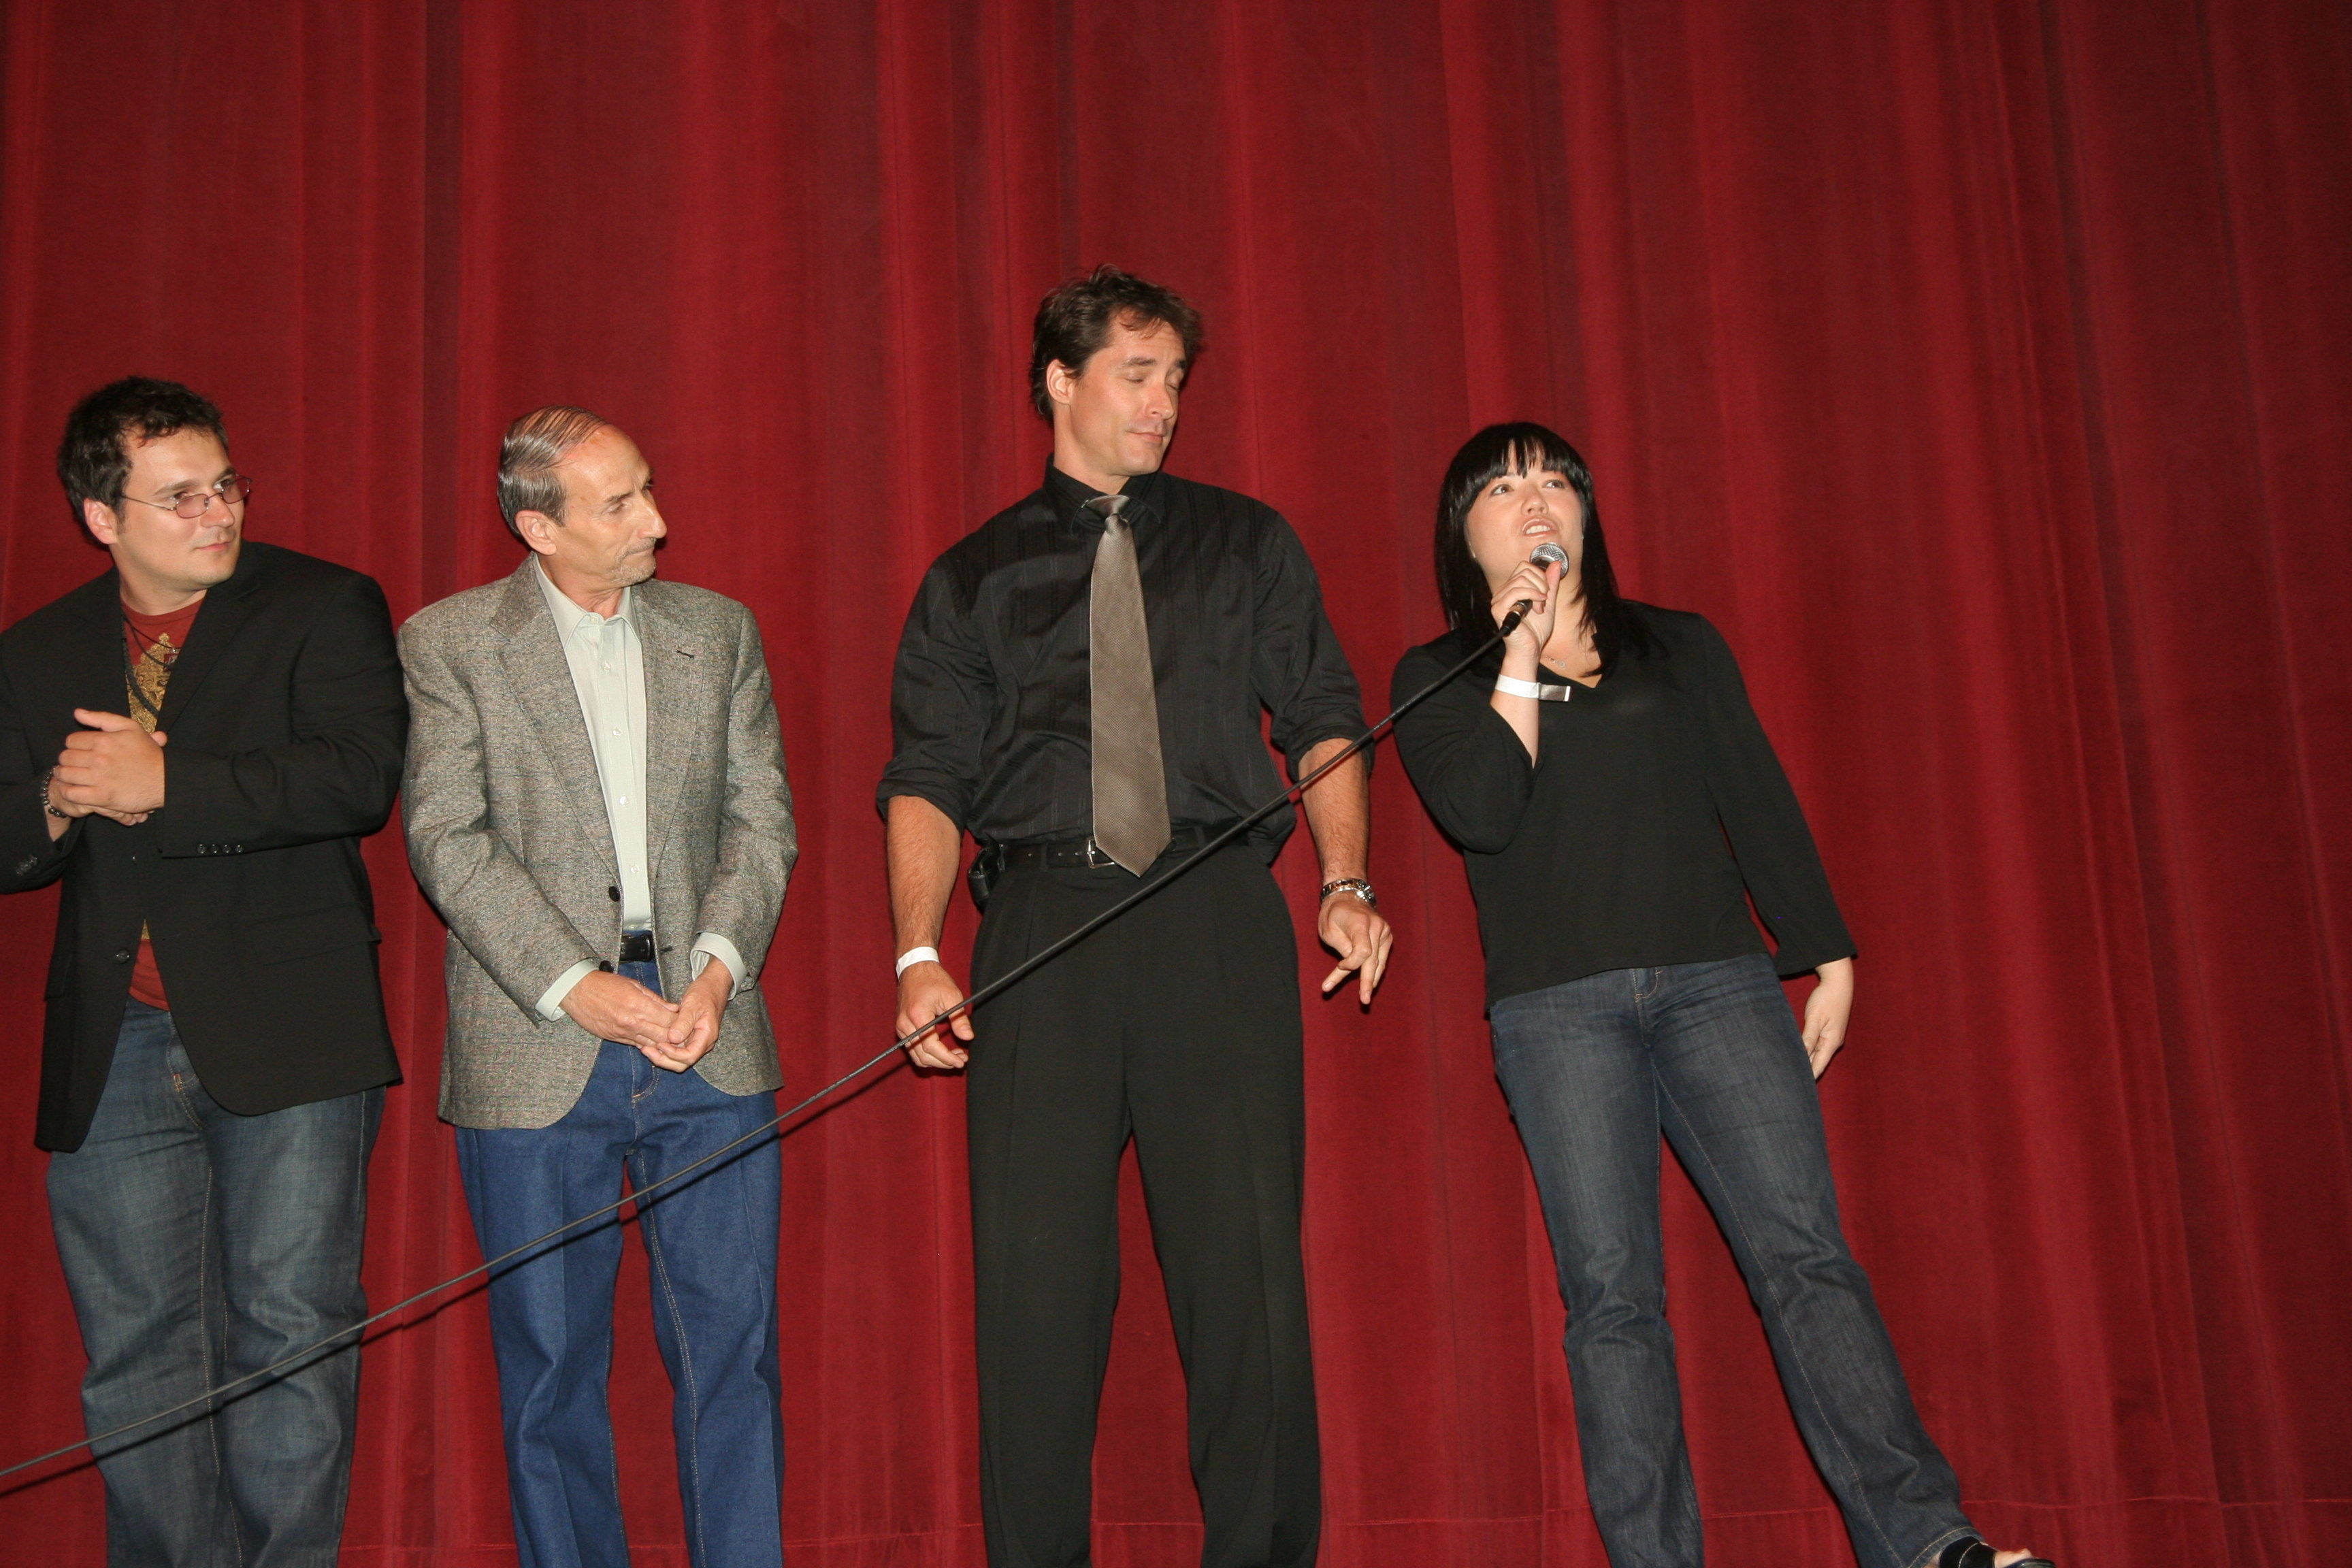 (R to L) Associate Producer Erin Quill, Co-Producer Brad Thorton, and Actor Michael Auteri on stage at the LA Premiere of THE SENSEI for the Los Angeles Asian Pacific Film Festival.